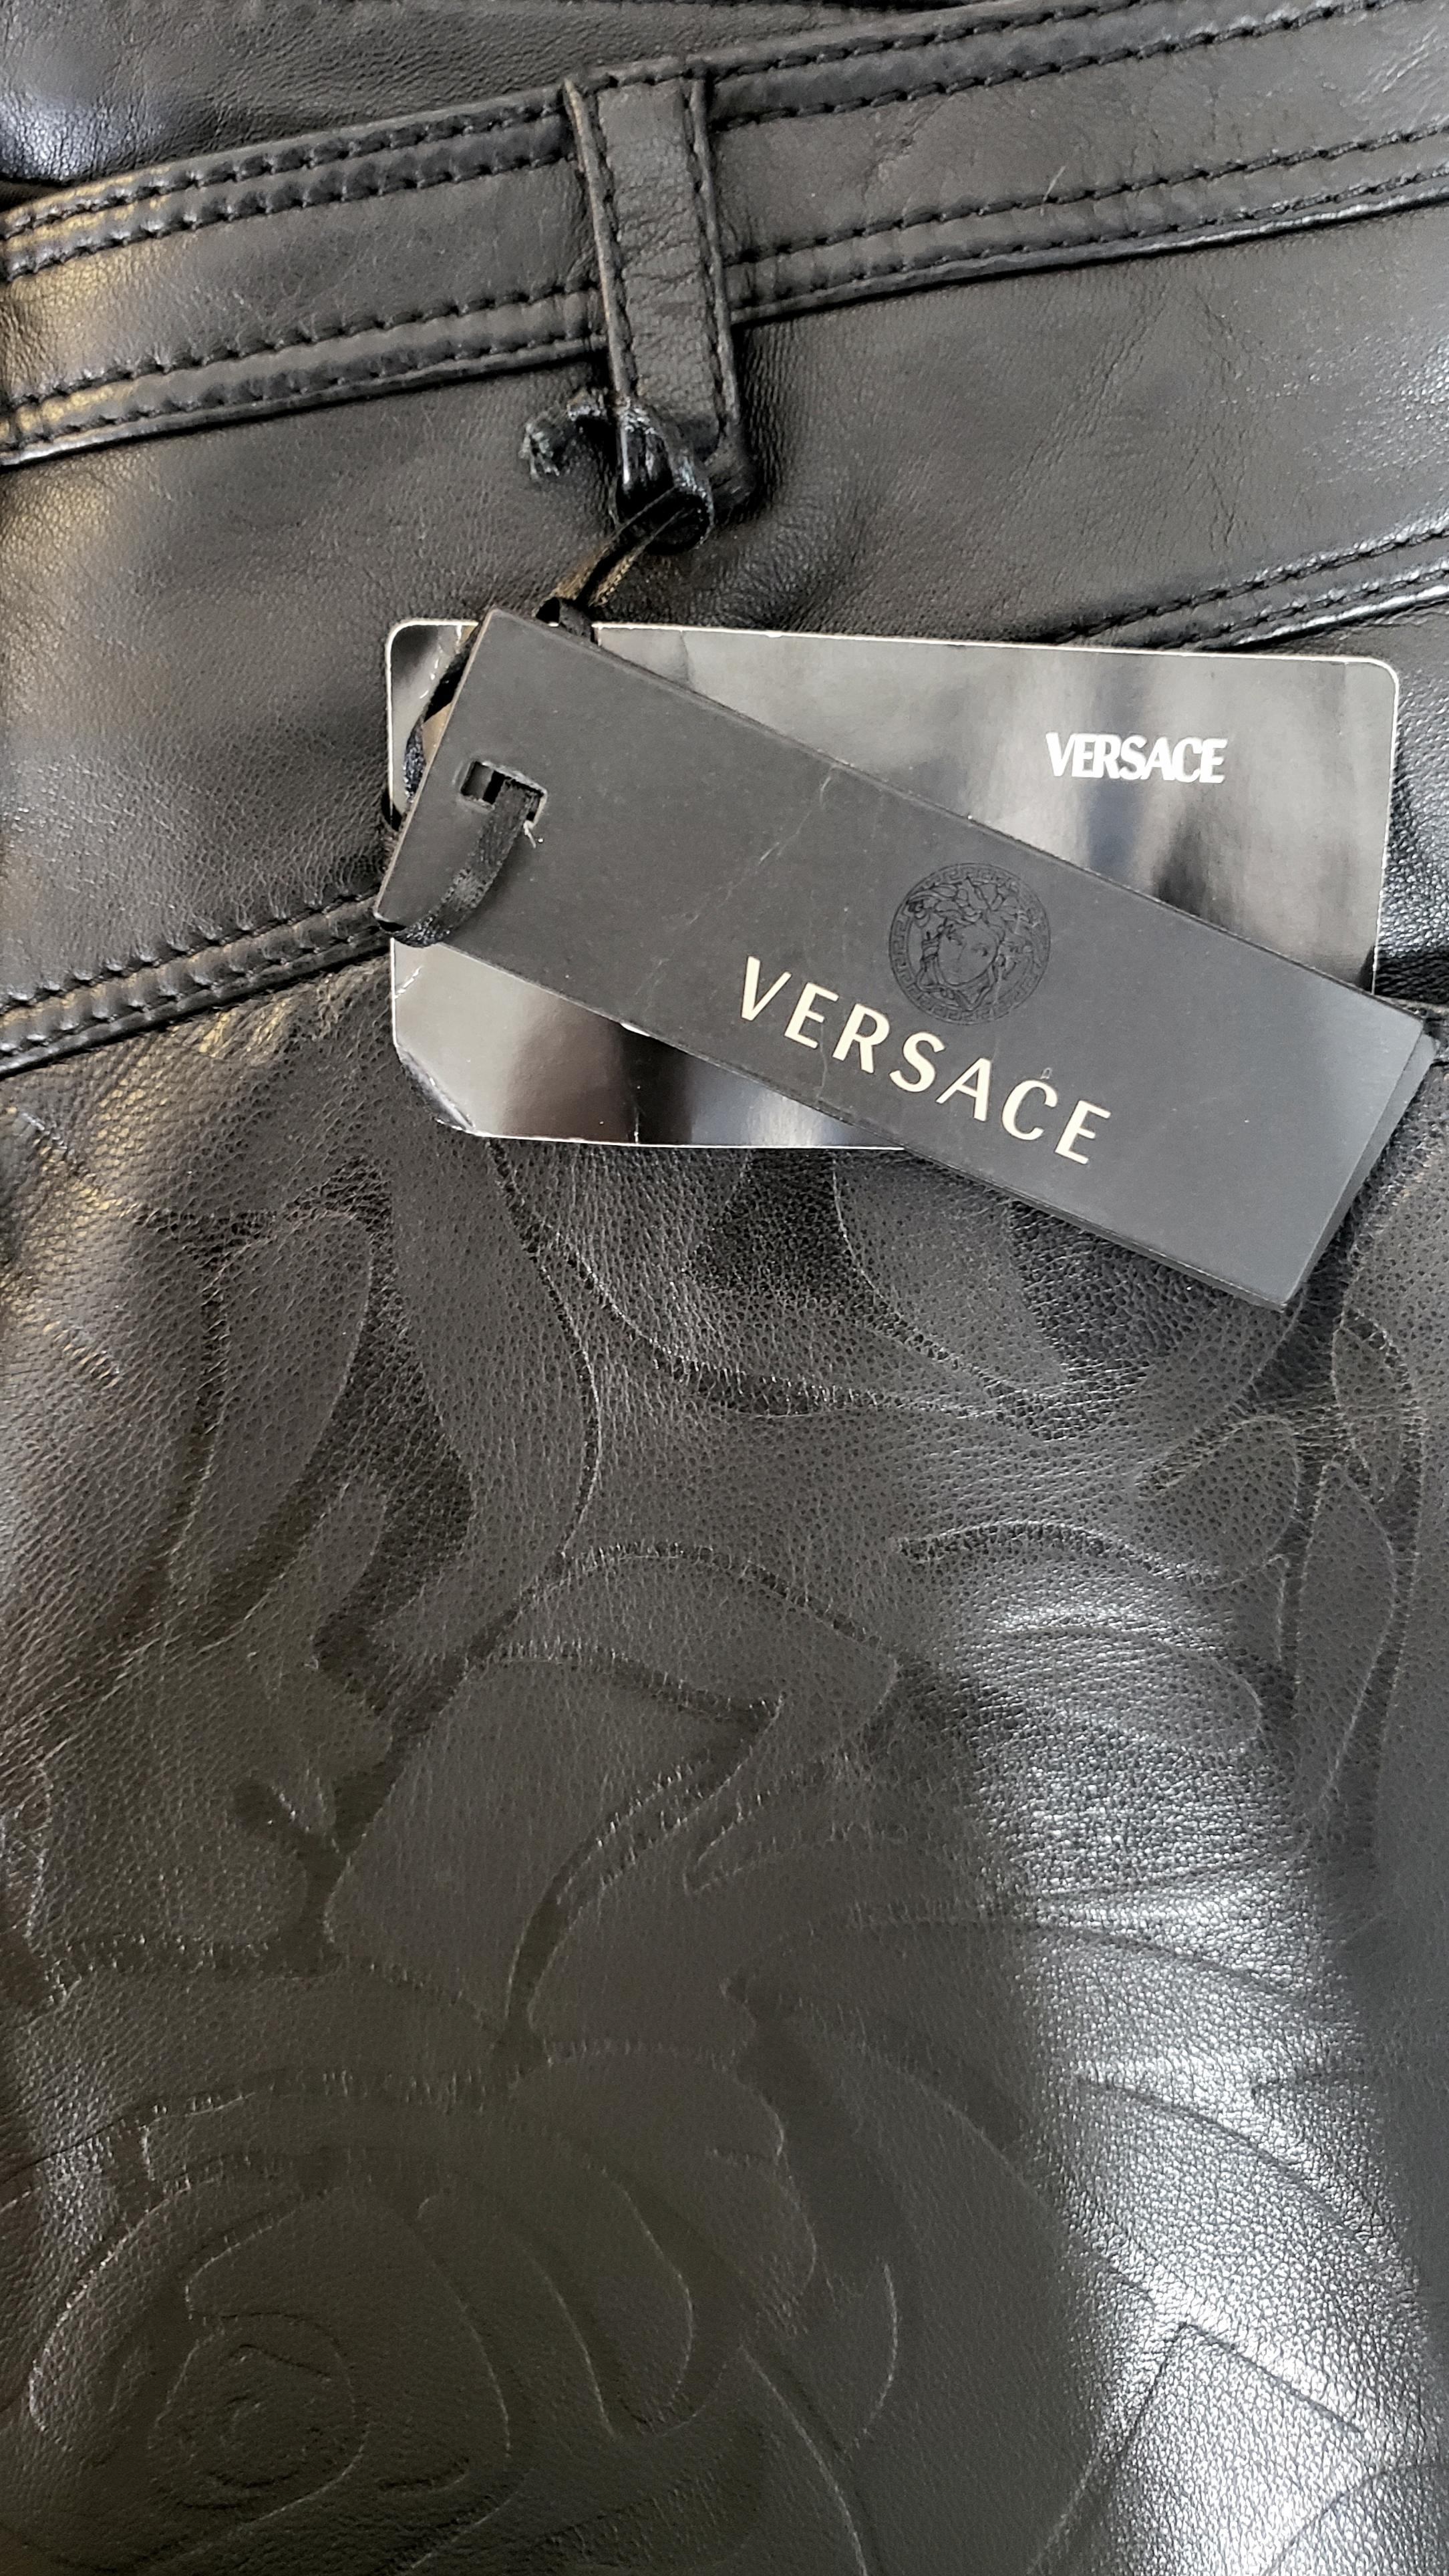 S/S 2014 Look # 35 VERSACE BLACK LEATHER FLORAL PRINT PANTS size 38 - 2 For Sale 4